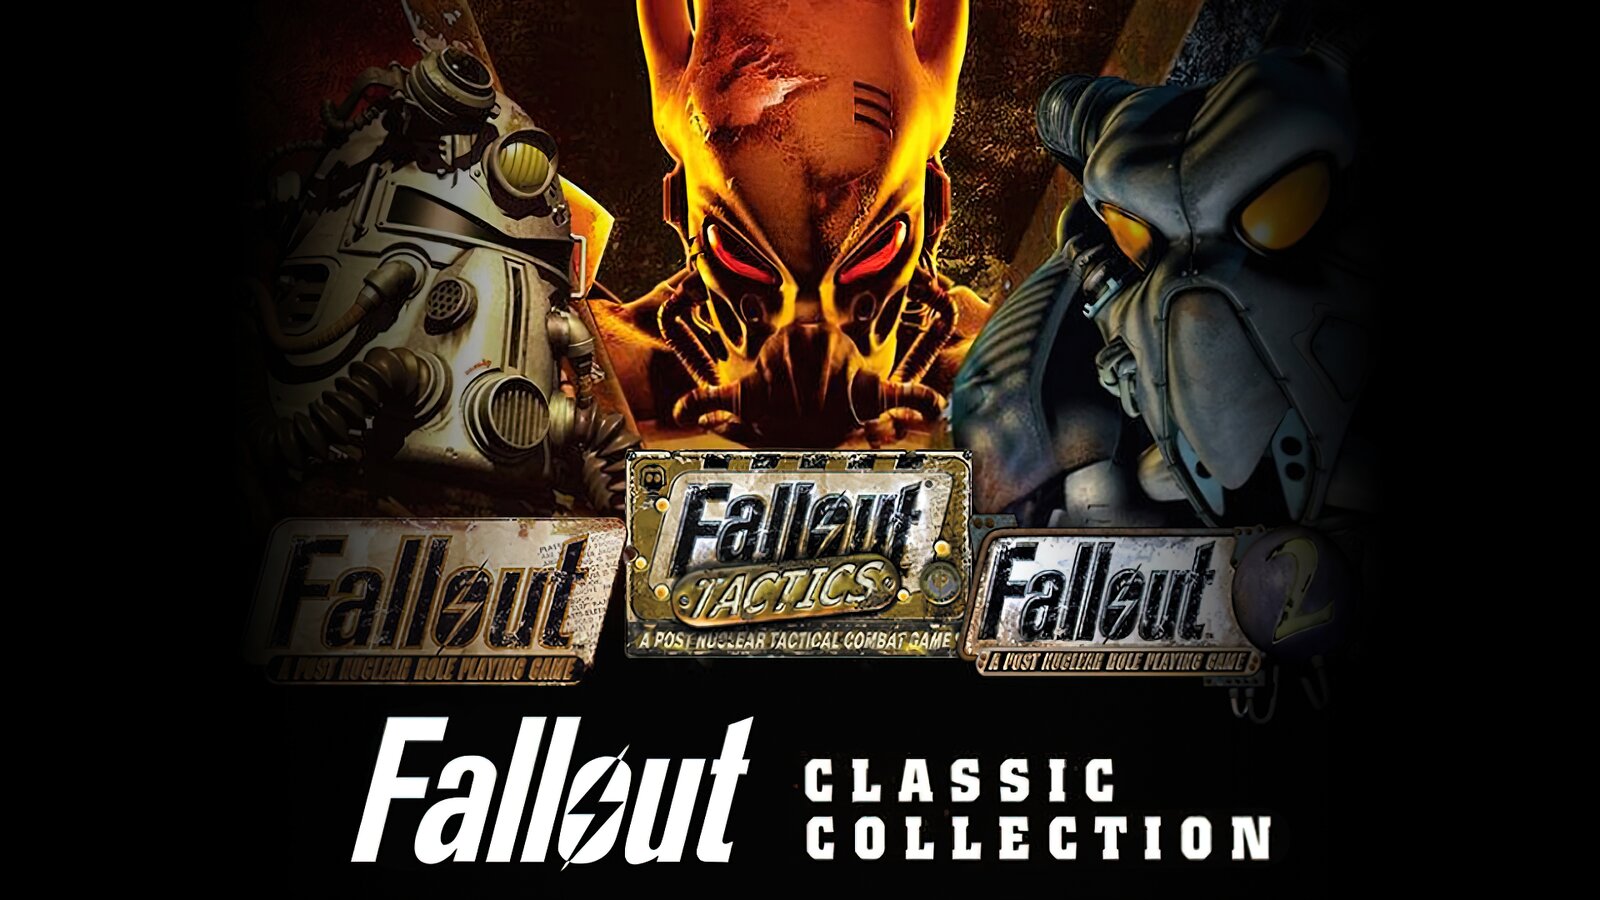 Русификатор fallout epic games. Fallout Classic collection. Fallout Tactics Brotherhood of Steel. Fallout, Fallout 2 и Fallout Tactics. Фоллаут Тактикс.